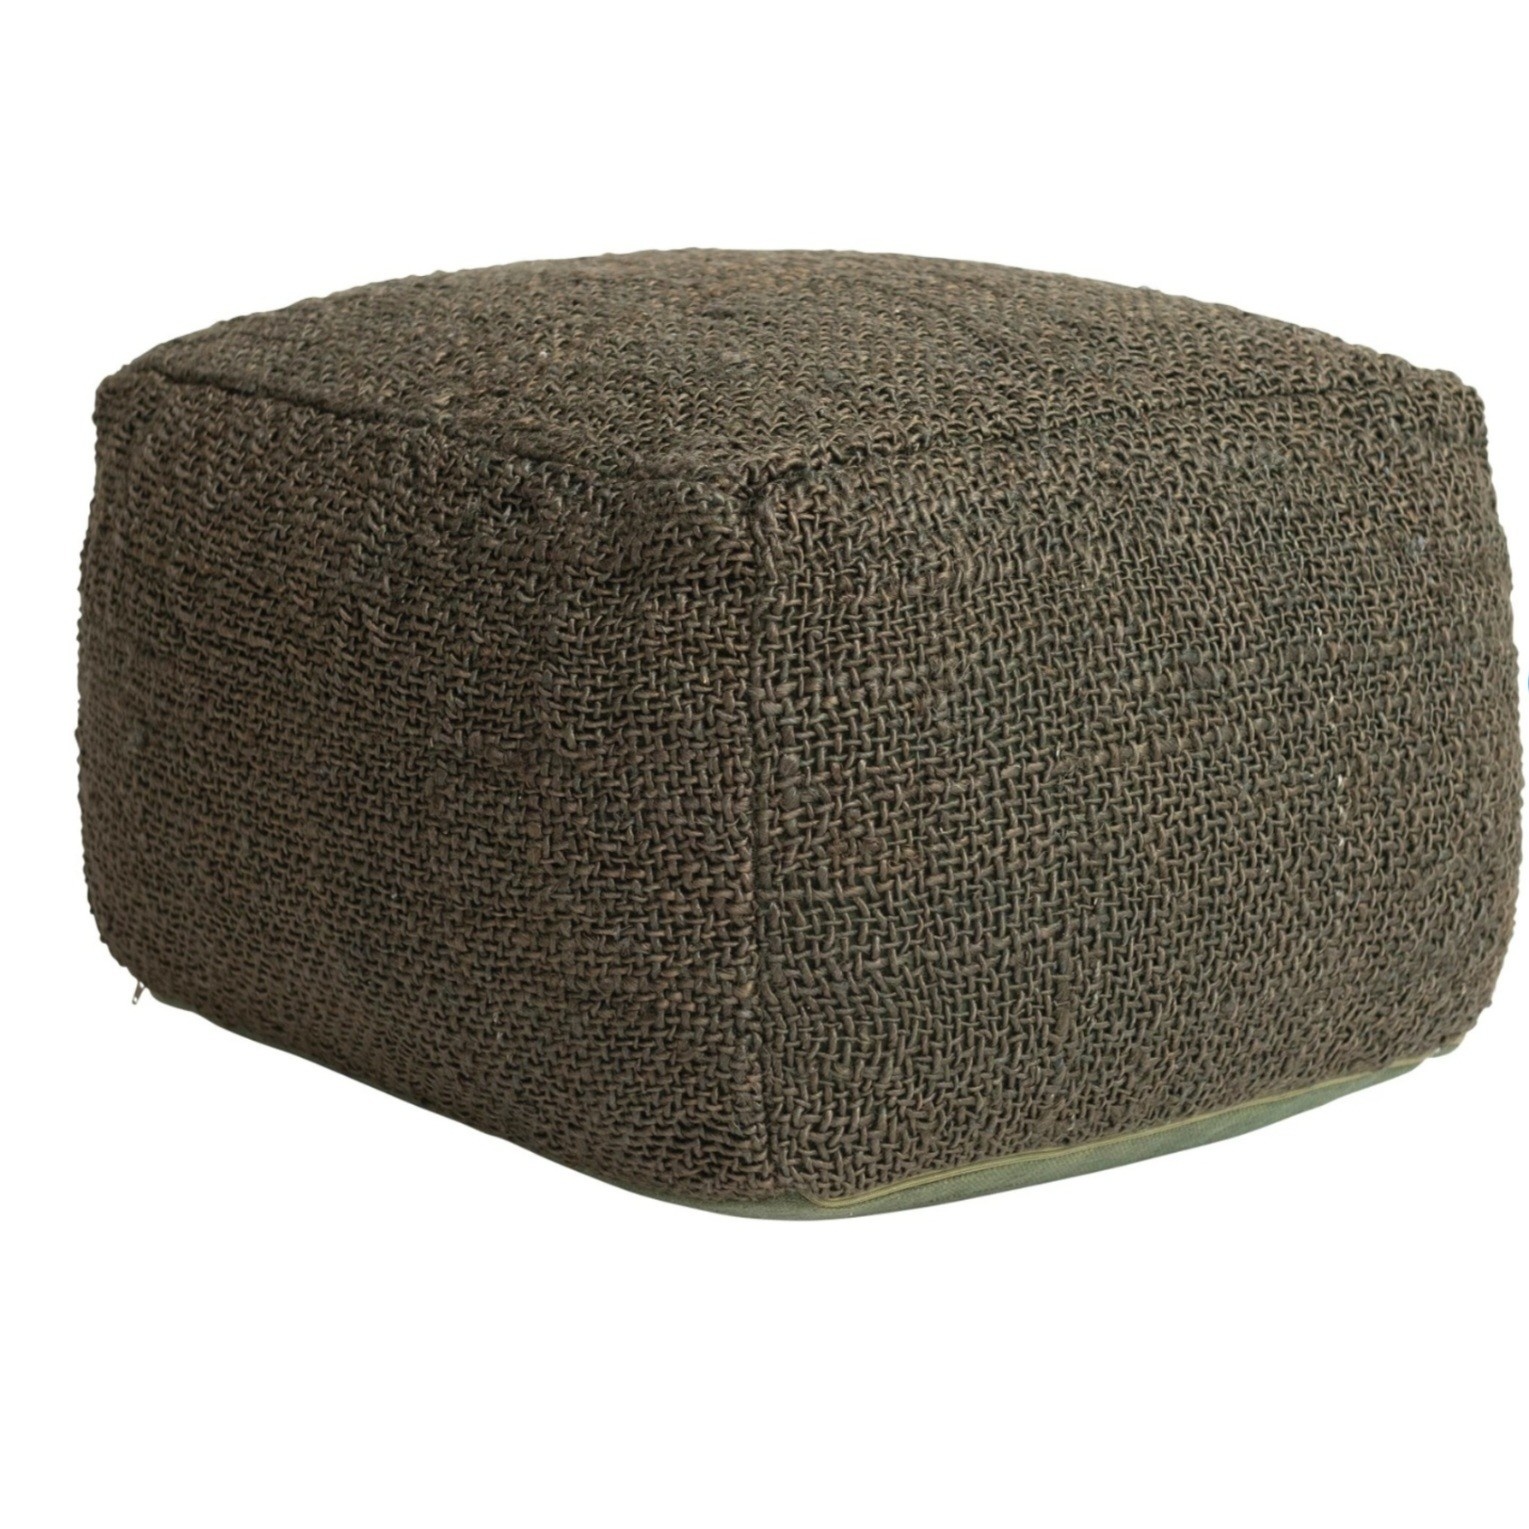 Woven Jute & Cotton Pouf, Olive Green, 26x19x26 Furniture Available for Local Delivery and Pick Up